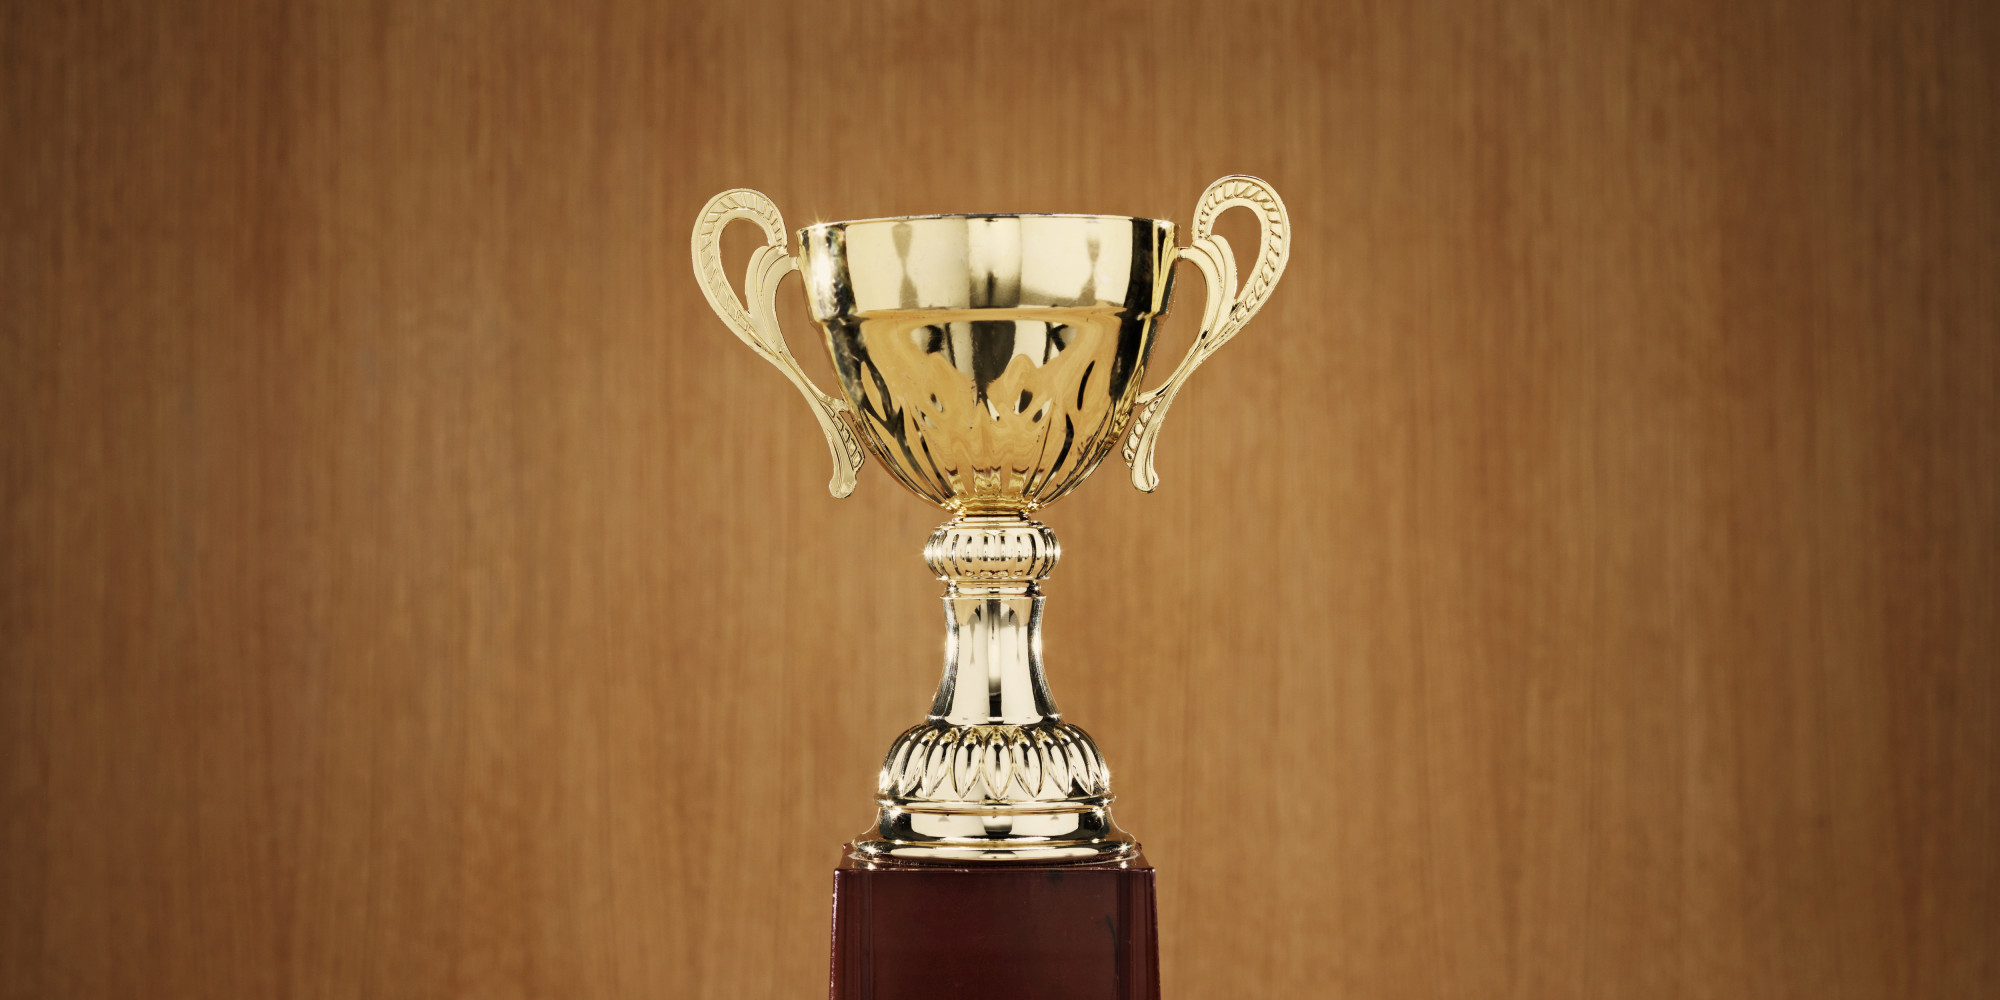 Trophy on wooden background